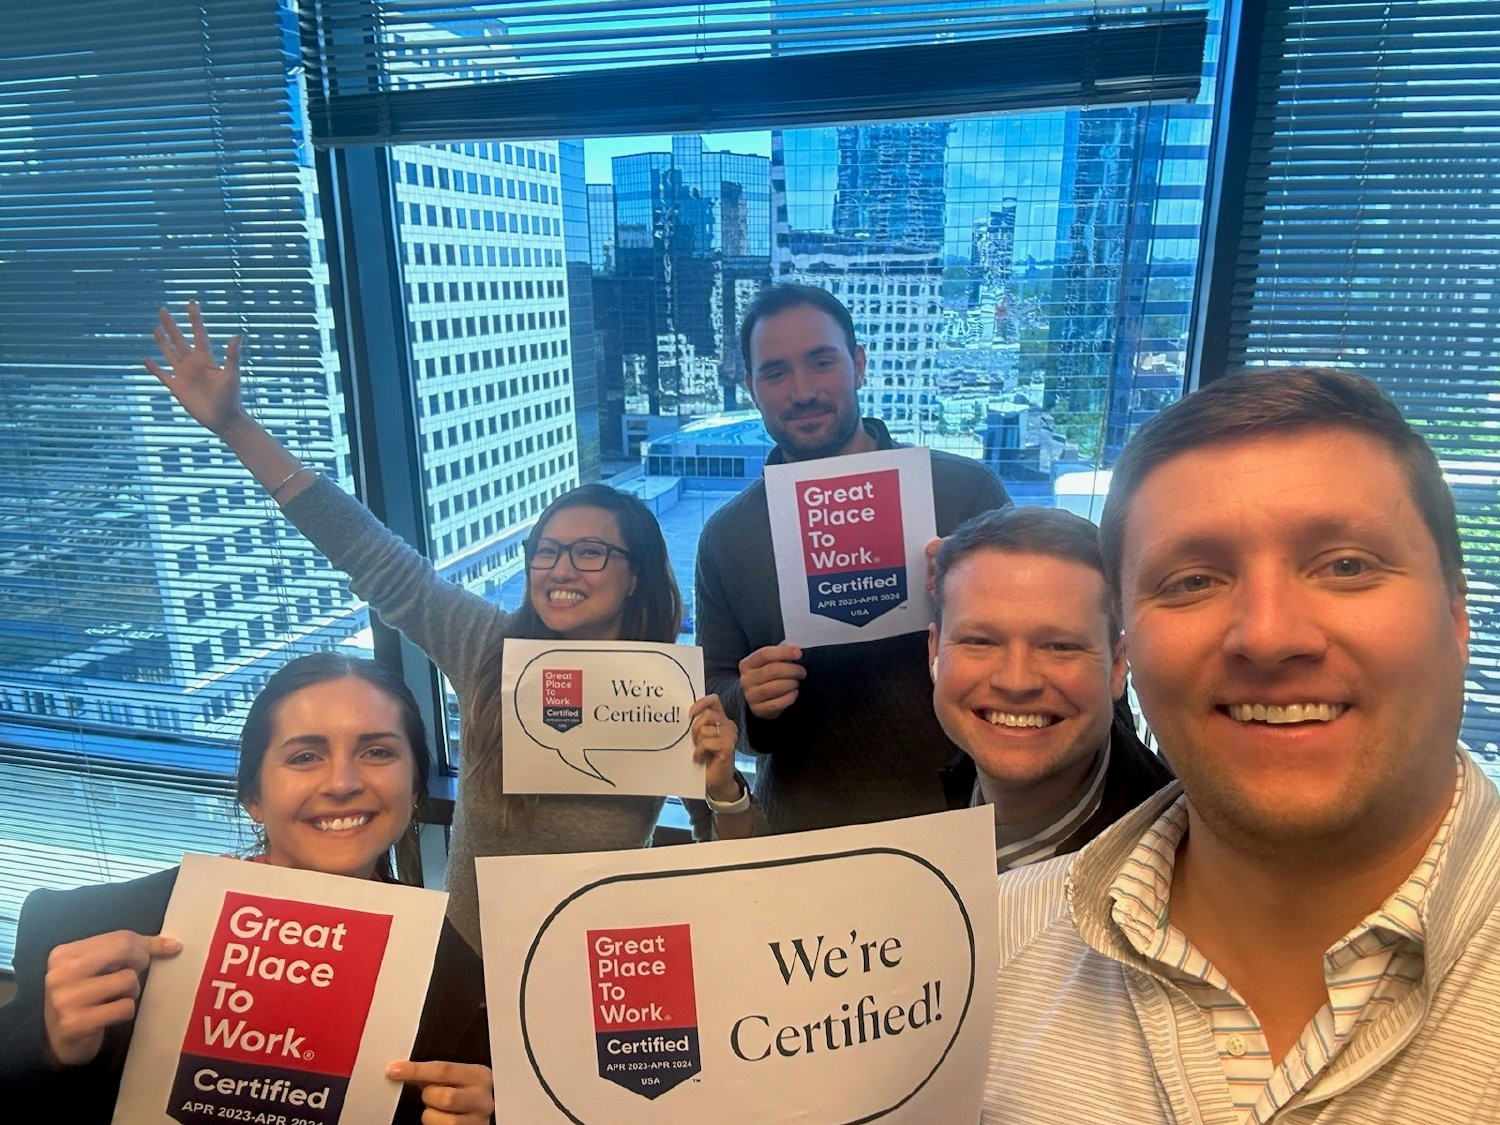 Celebrating Great Place to Work Certification